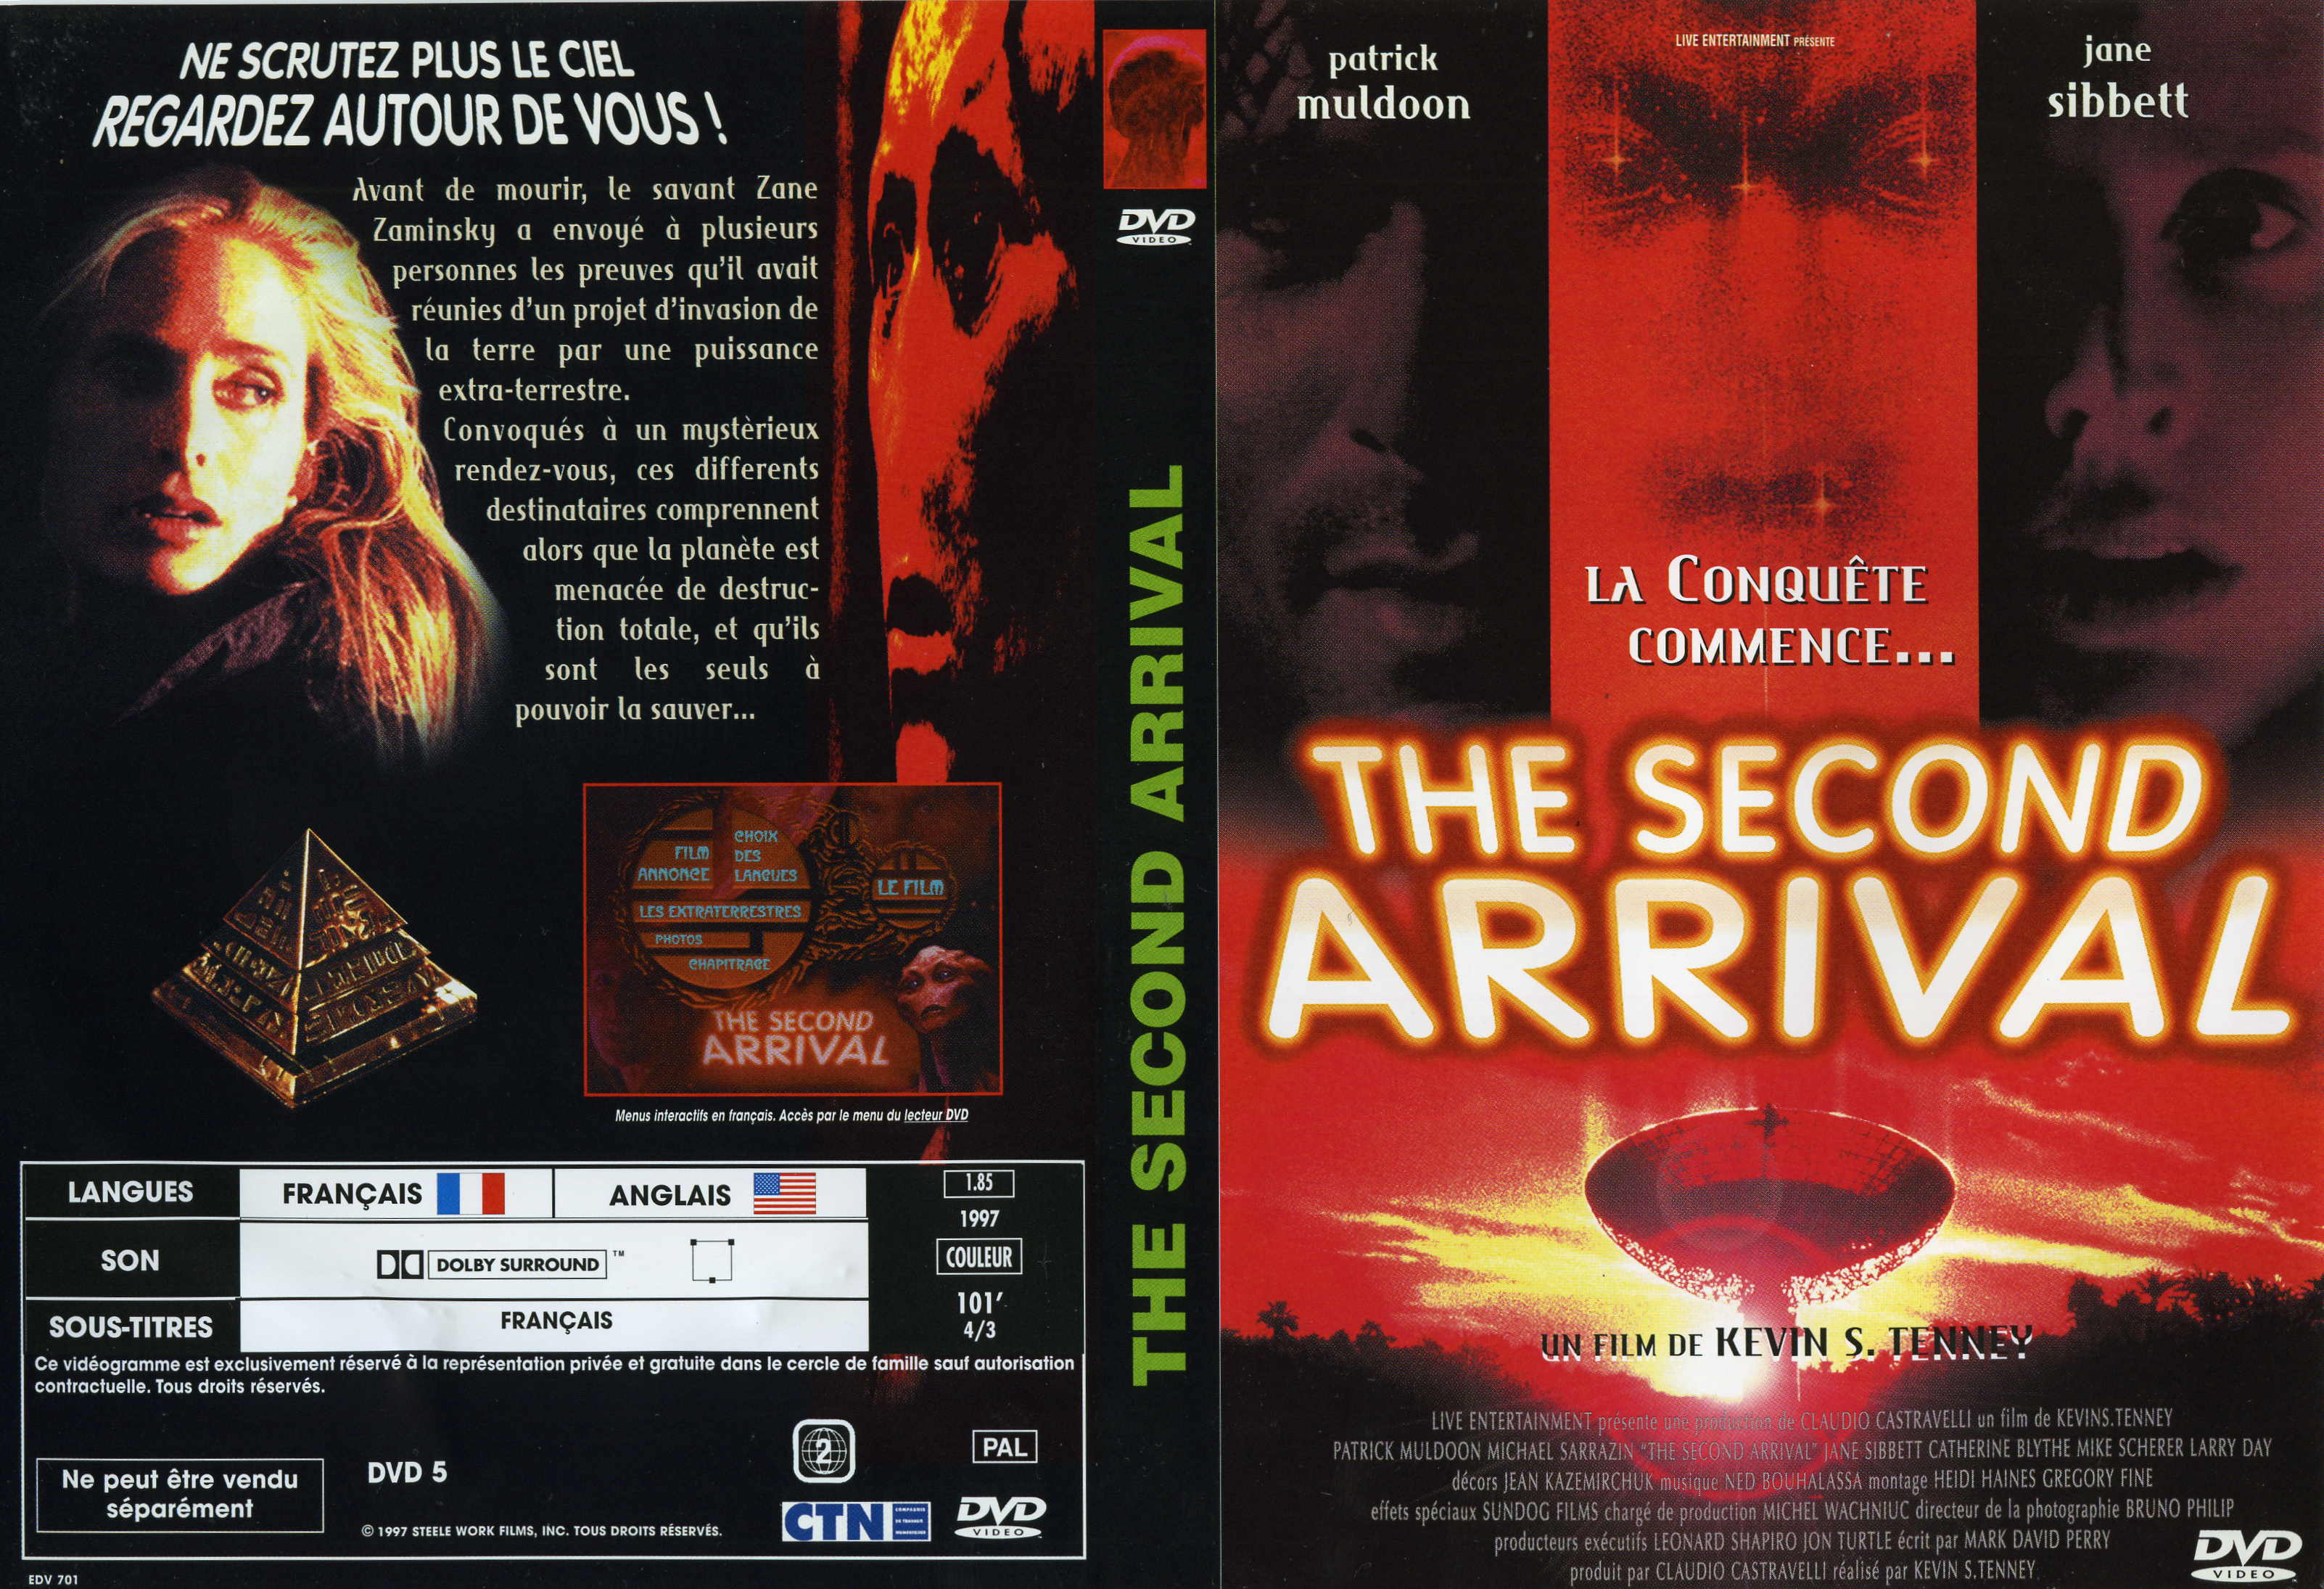 Jaquette DVD The second arrival v2